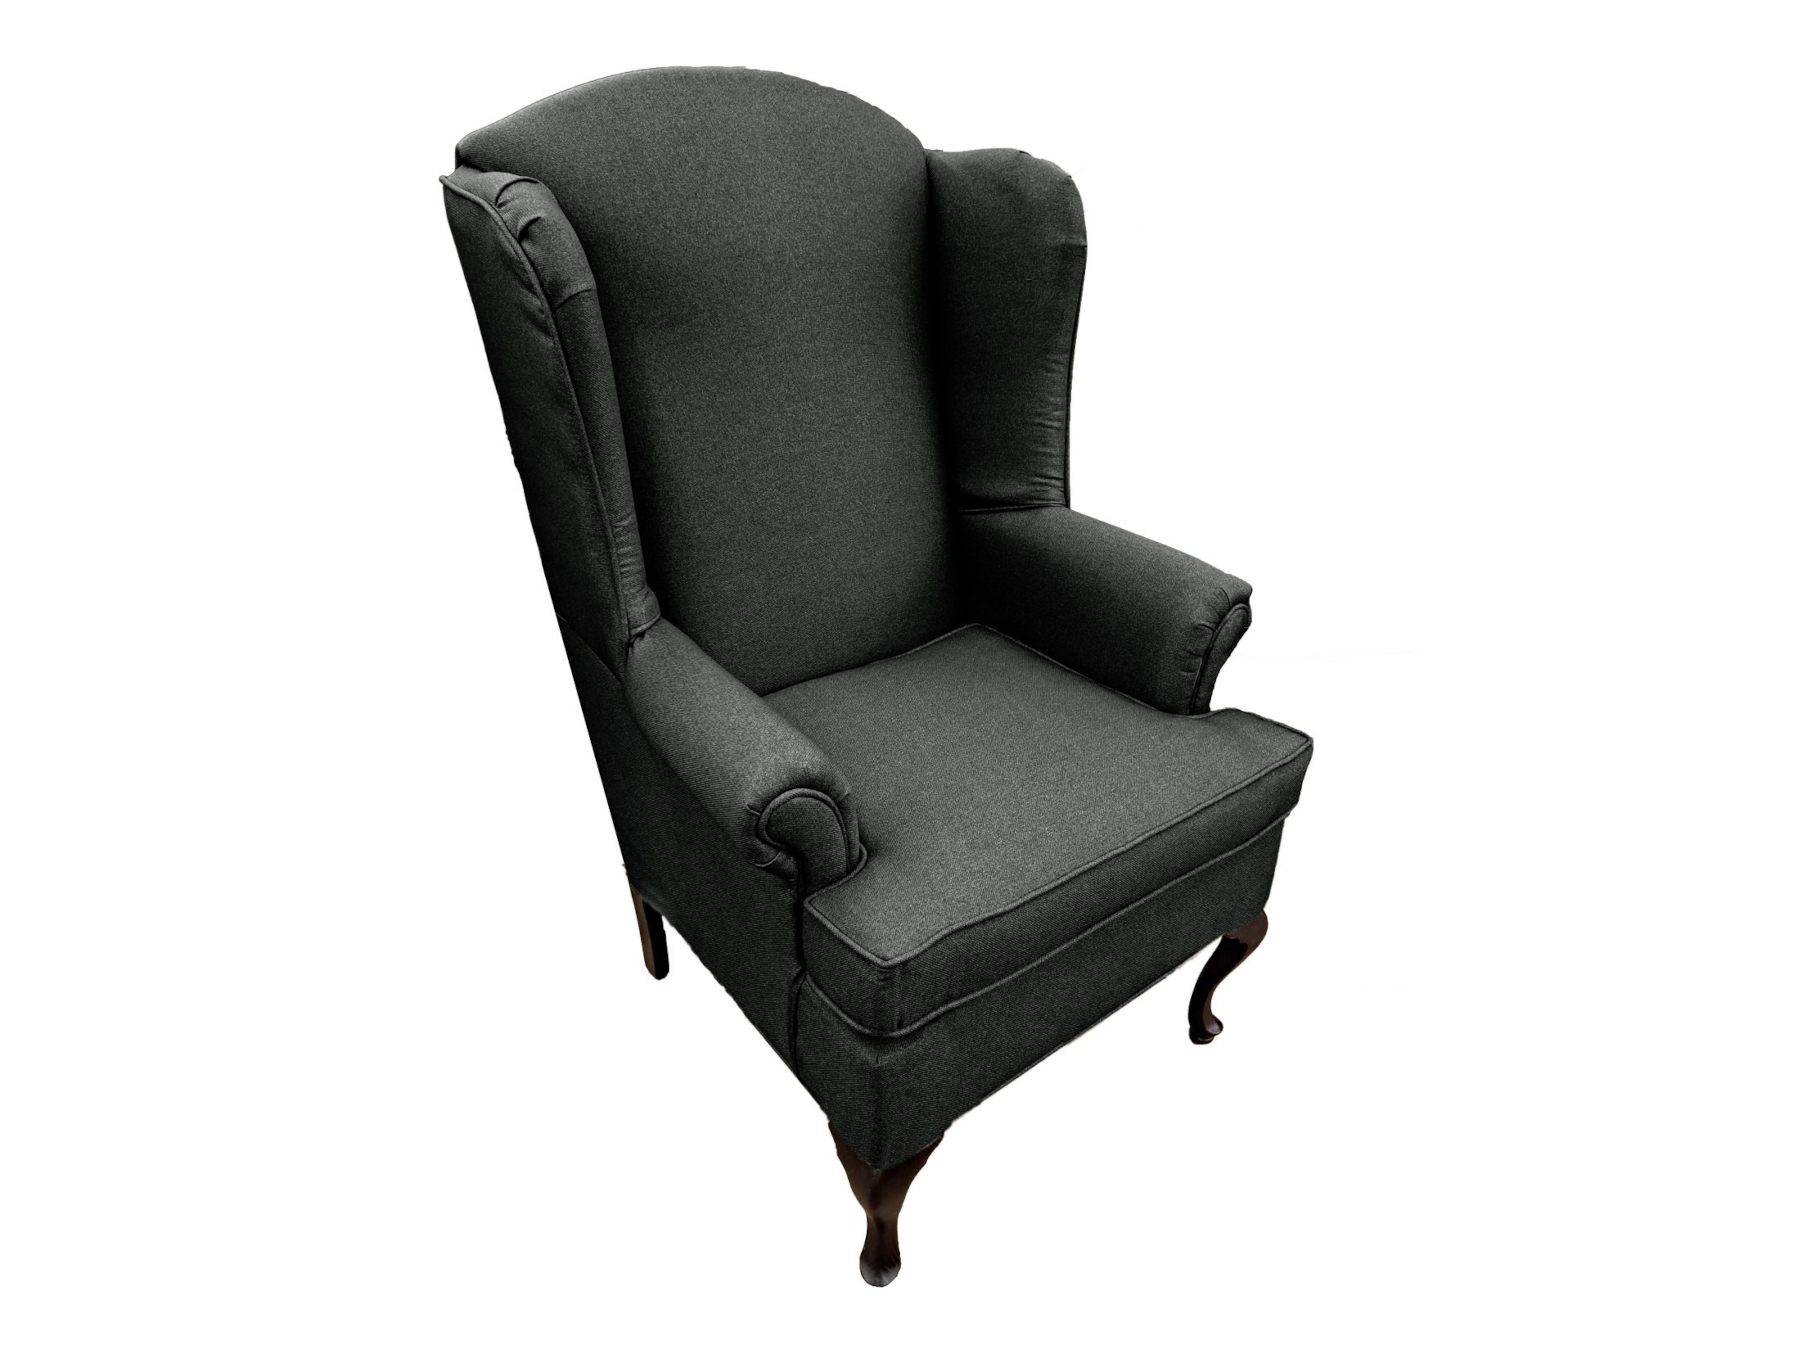 25658 - wing - back - chair - LH2200 - espresso - brown